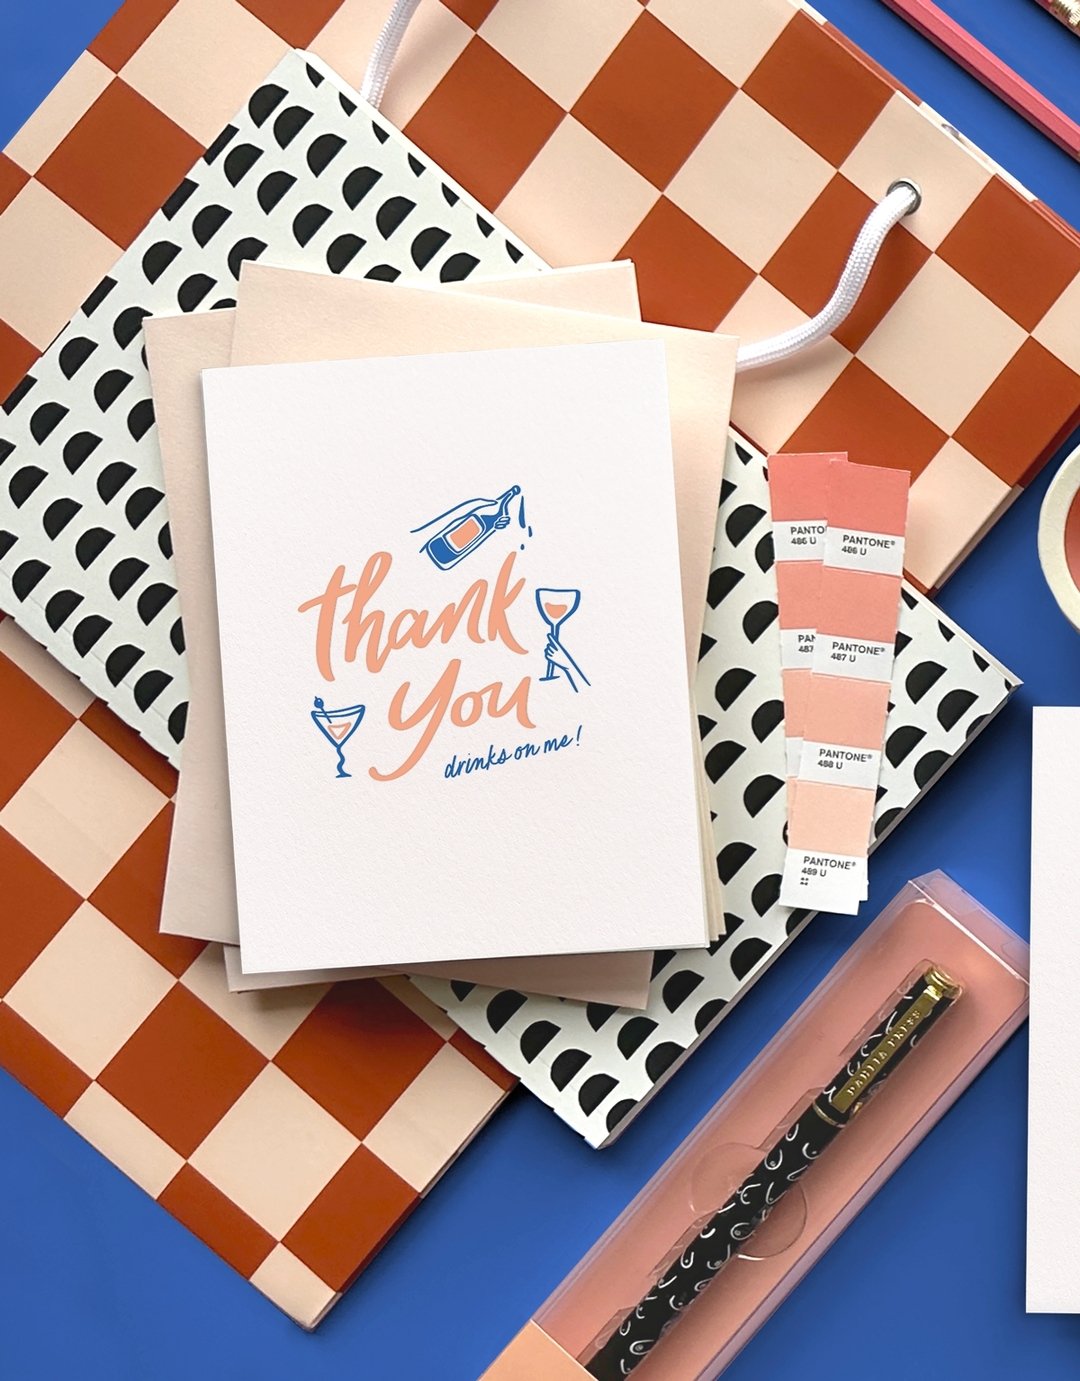 Say thank you in style. Shop all Thank You notes at link in bio.

#ThankYouCard #Letterpress #DrinksOnMe #Gratitude #ThankYouGift #Cheers #CardDesign #Stationery #GreetingCards #ThankYouNotes #HandmadeCards #CocktailCard #SendThanks #CardShop #Crafte